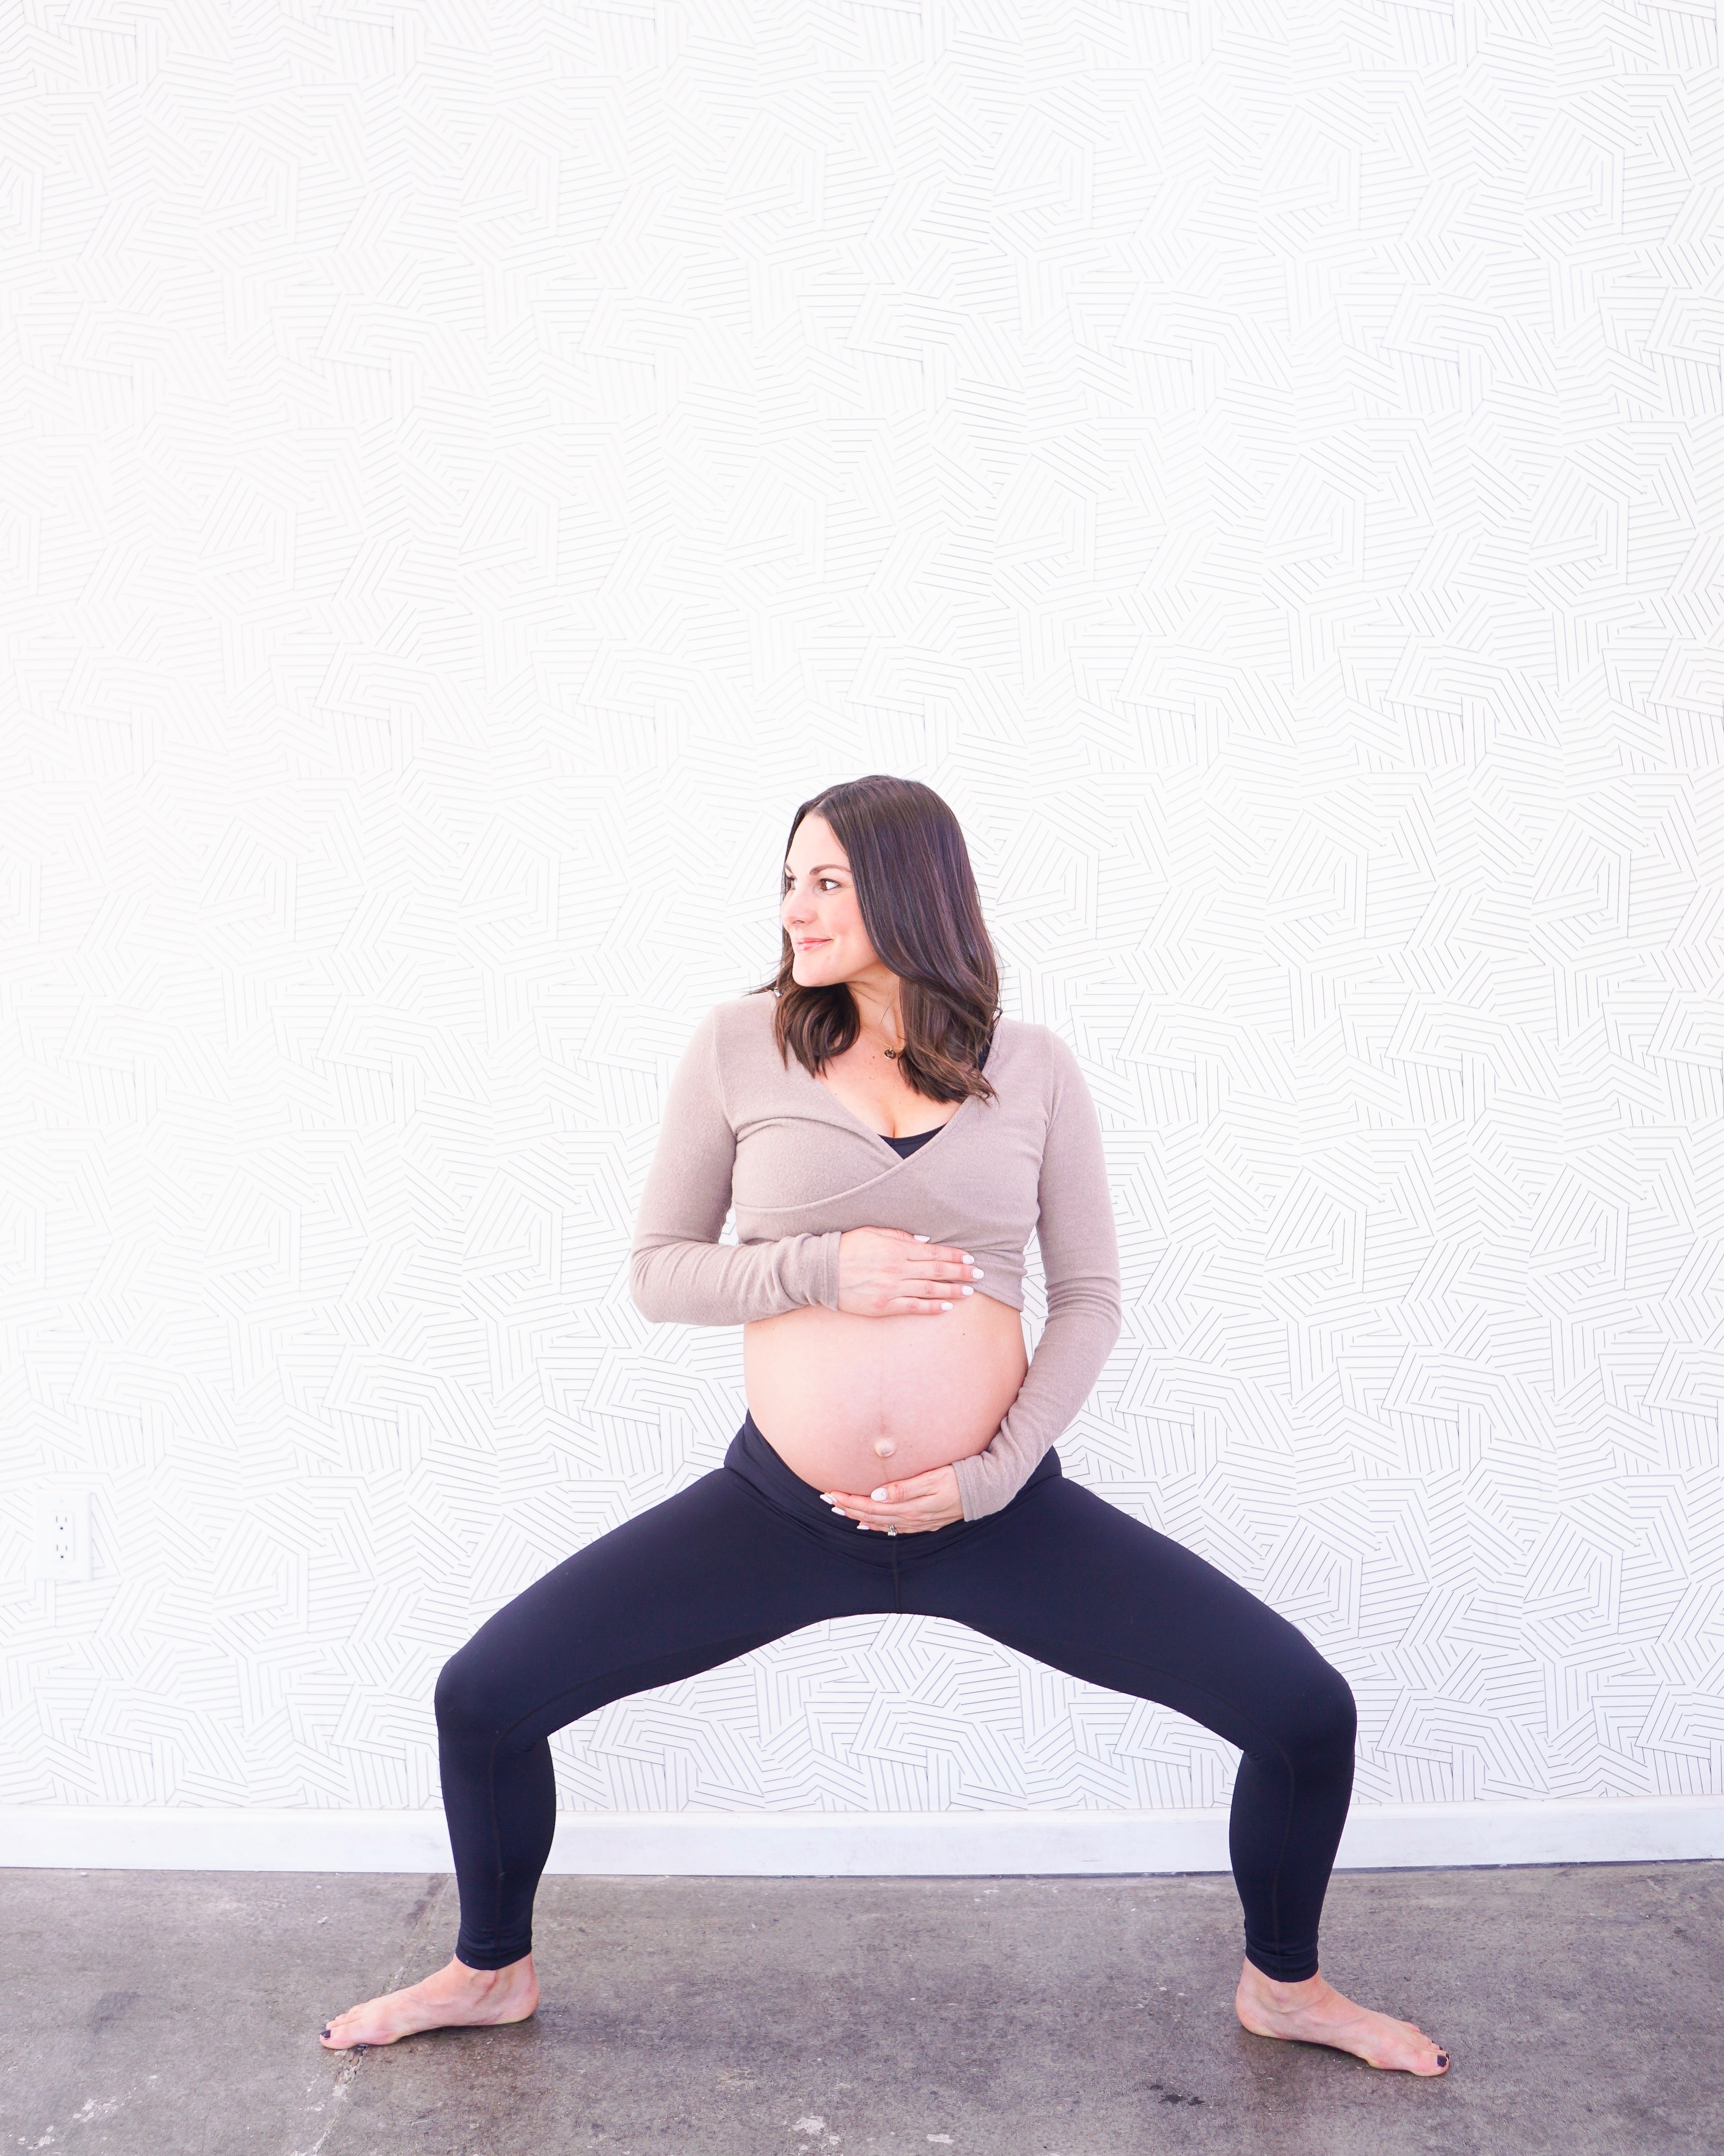 Yoga During Pregnancy - Poses, Benefits & Safety Tips